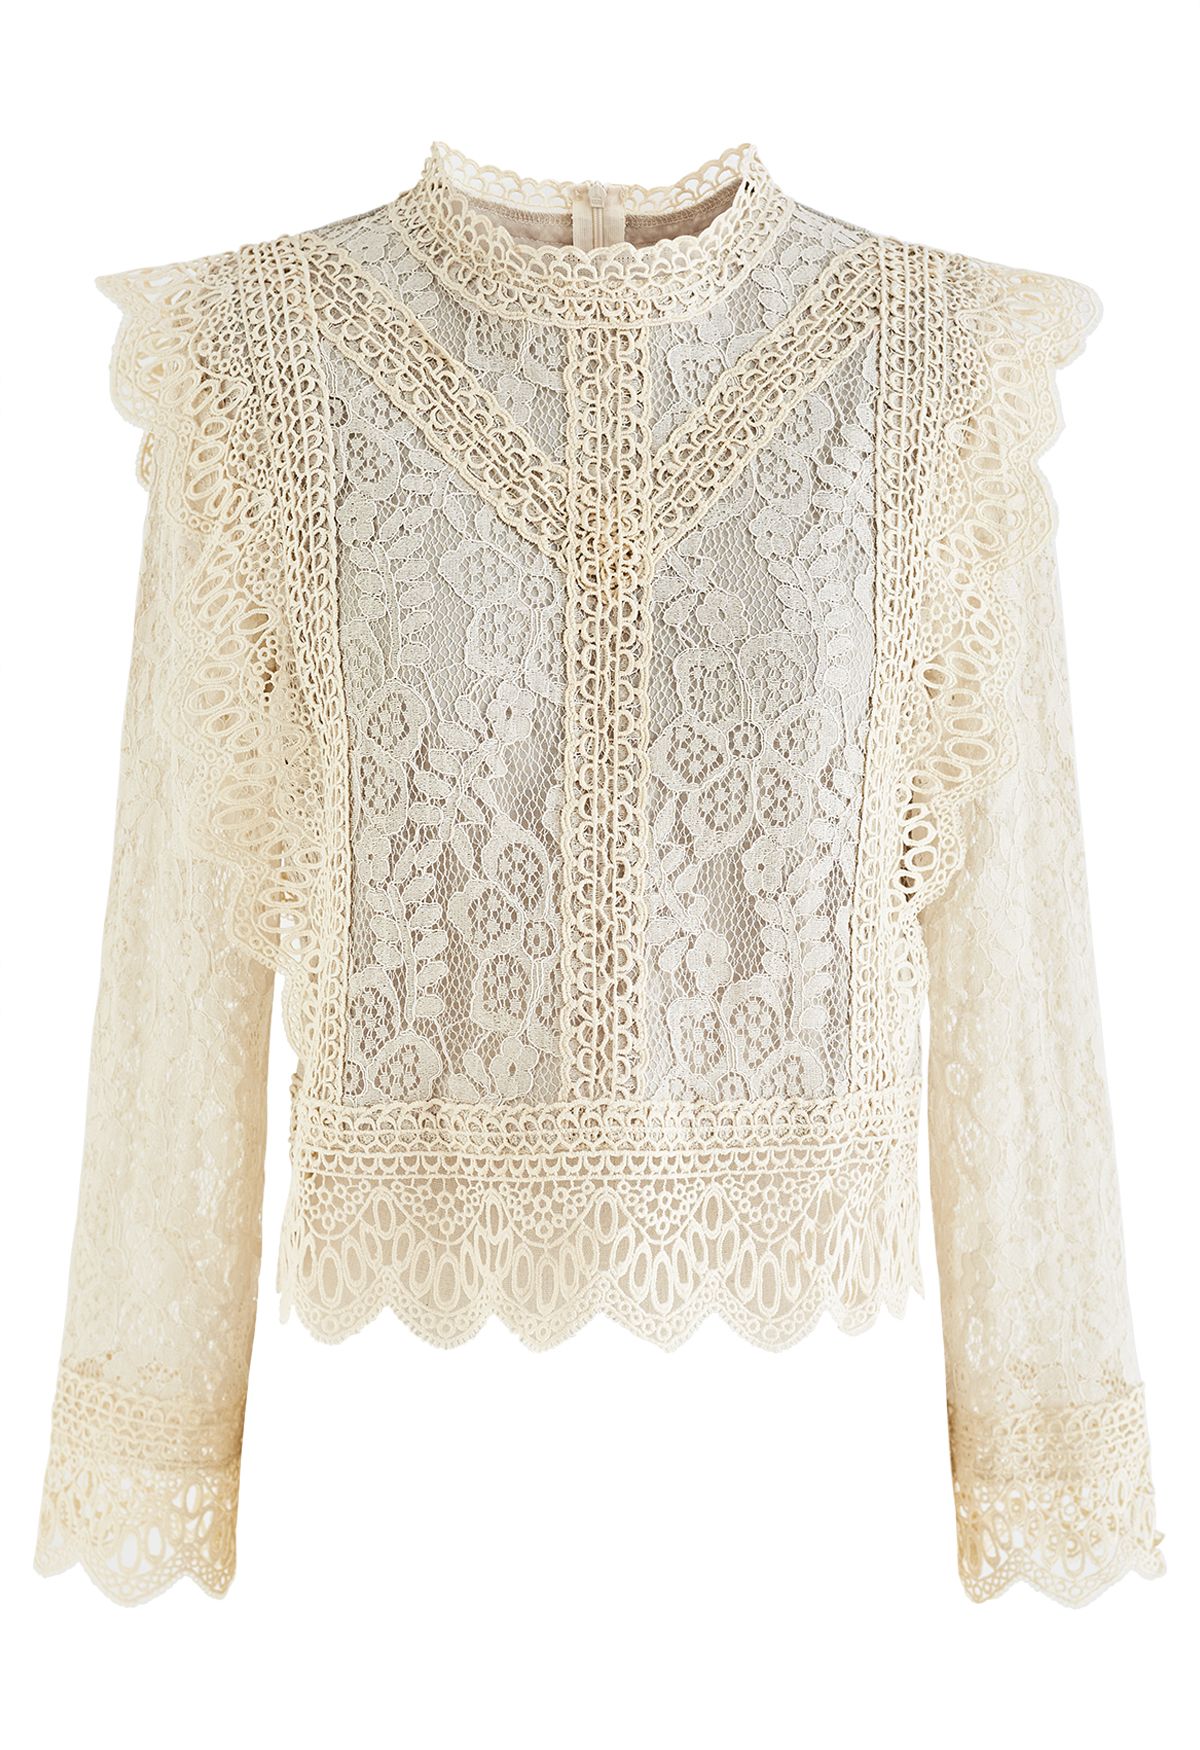 Your Sassy Start Long Sleeve Crochet Lace Top in Cream - Retro, Indie ...